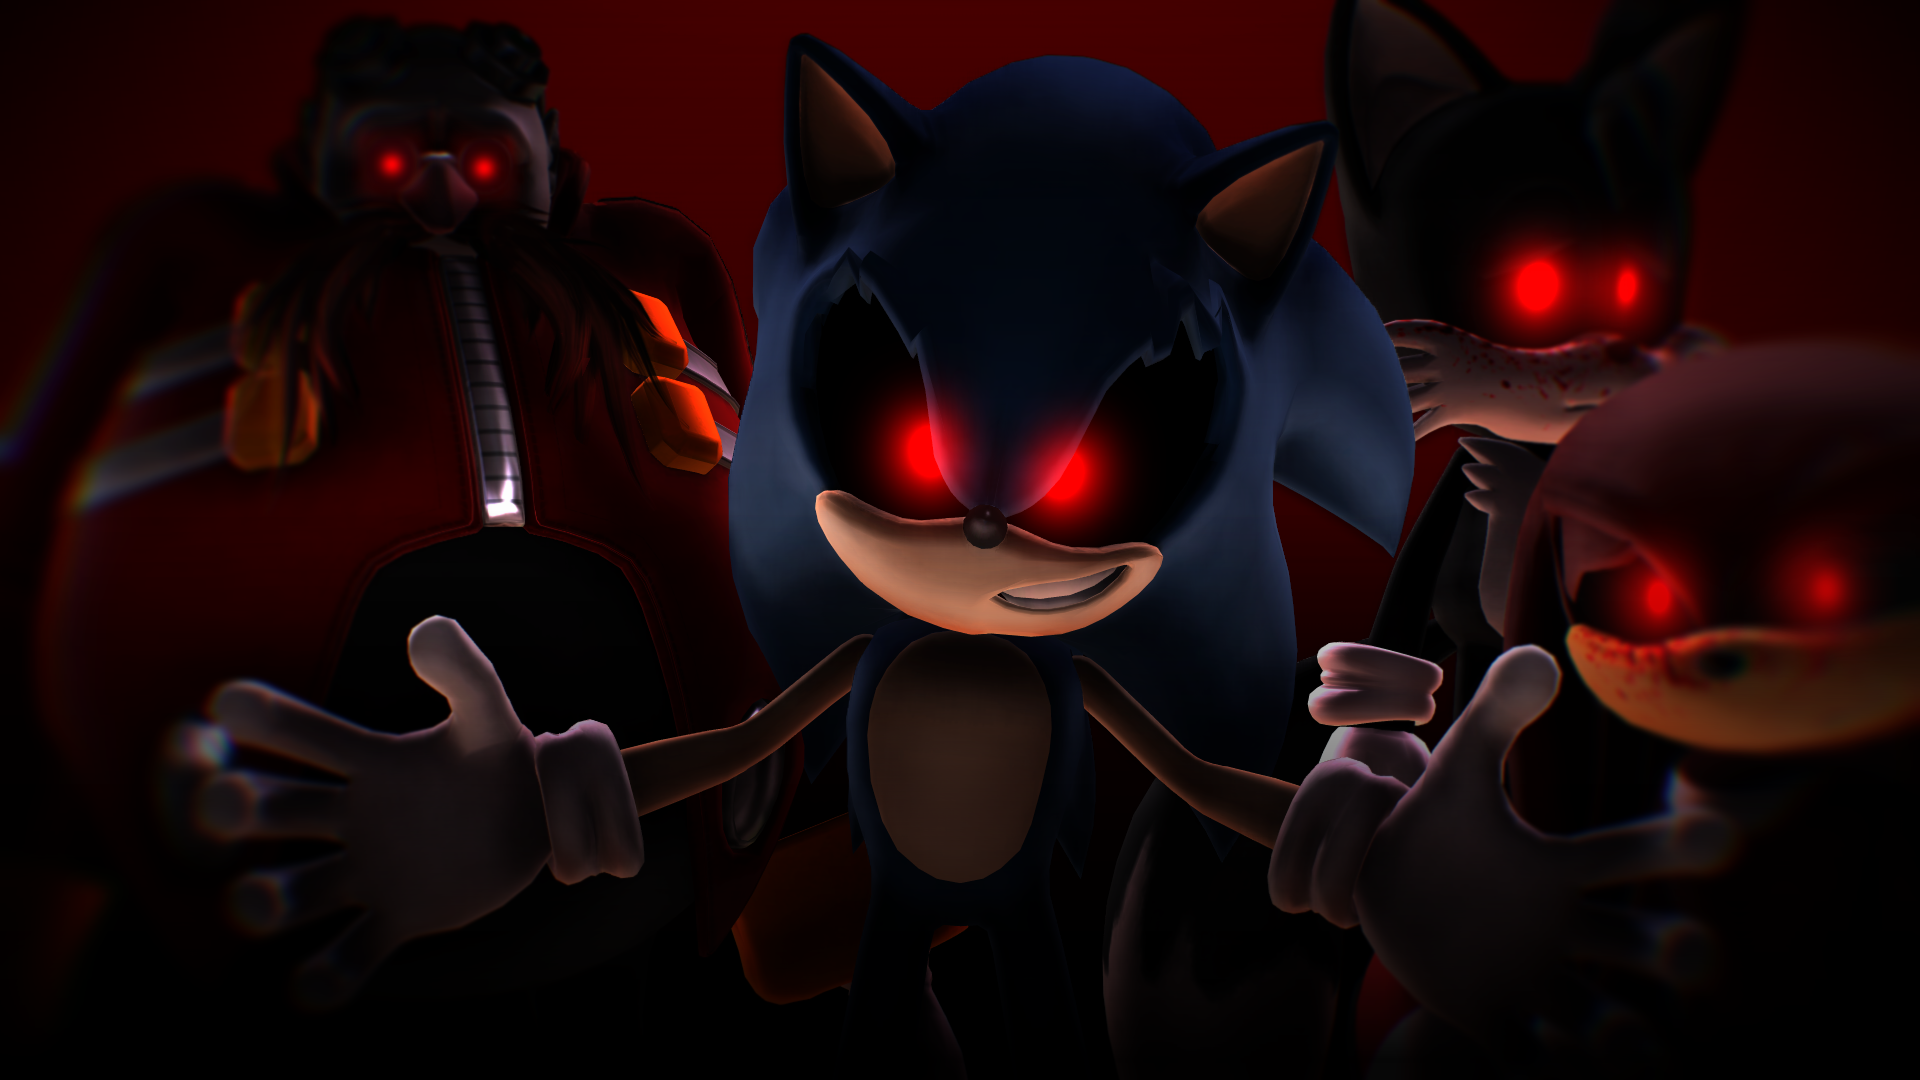 Sonic.exe act 2 remake by Thdeathbones on DeviantArt